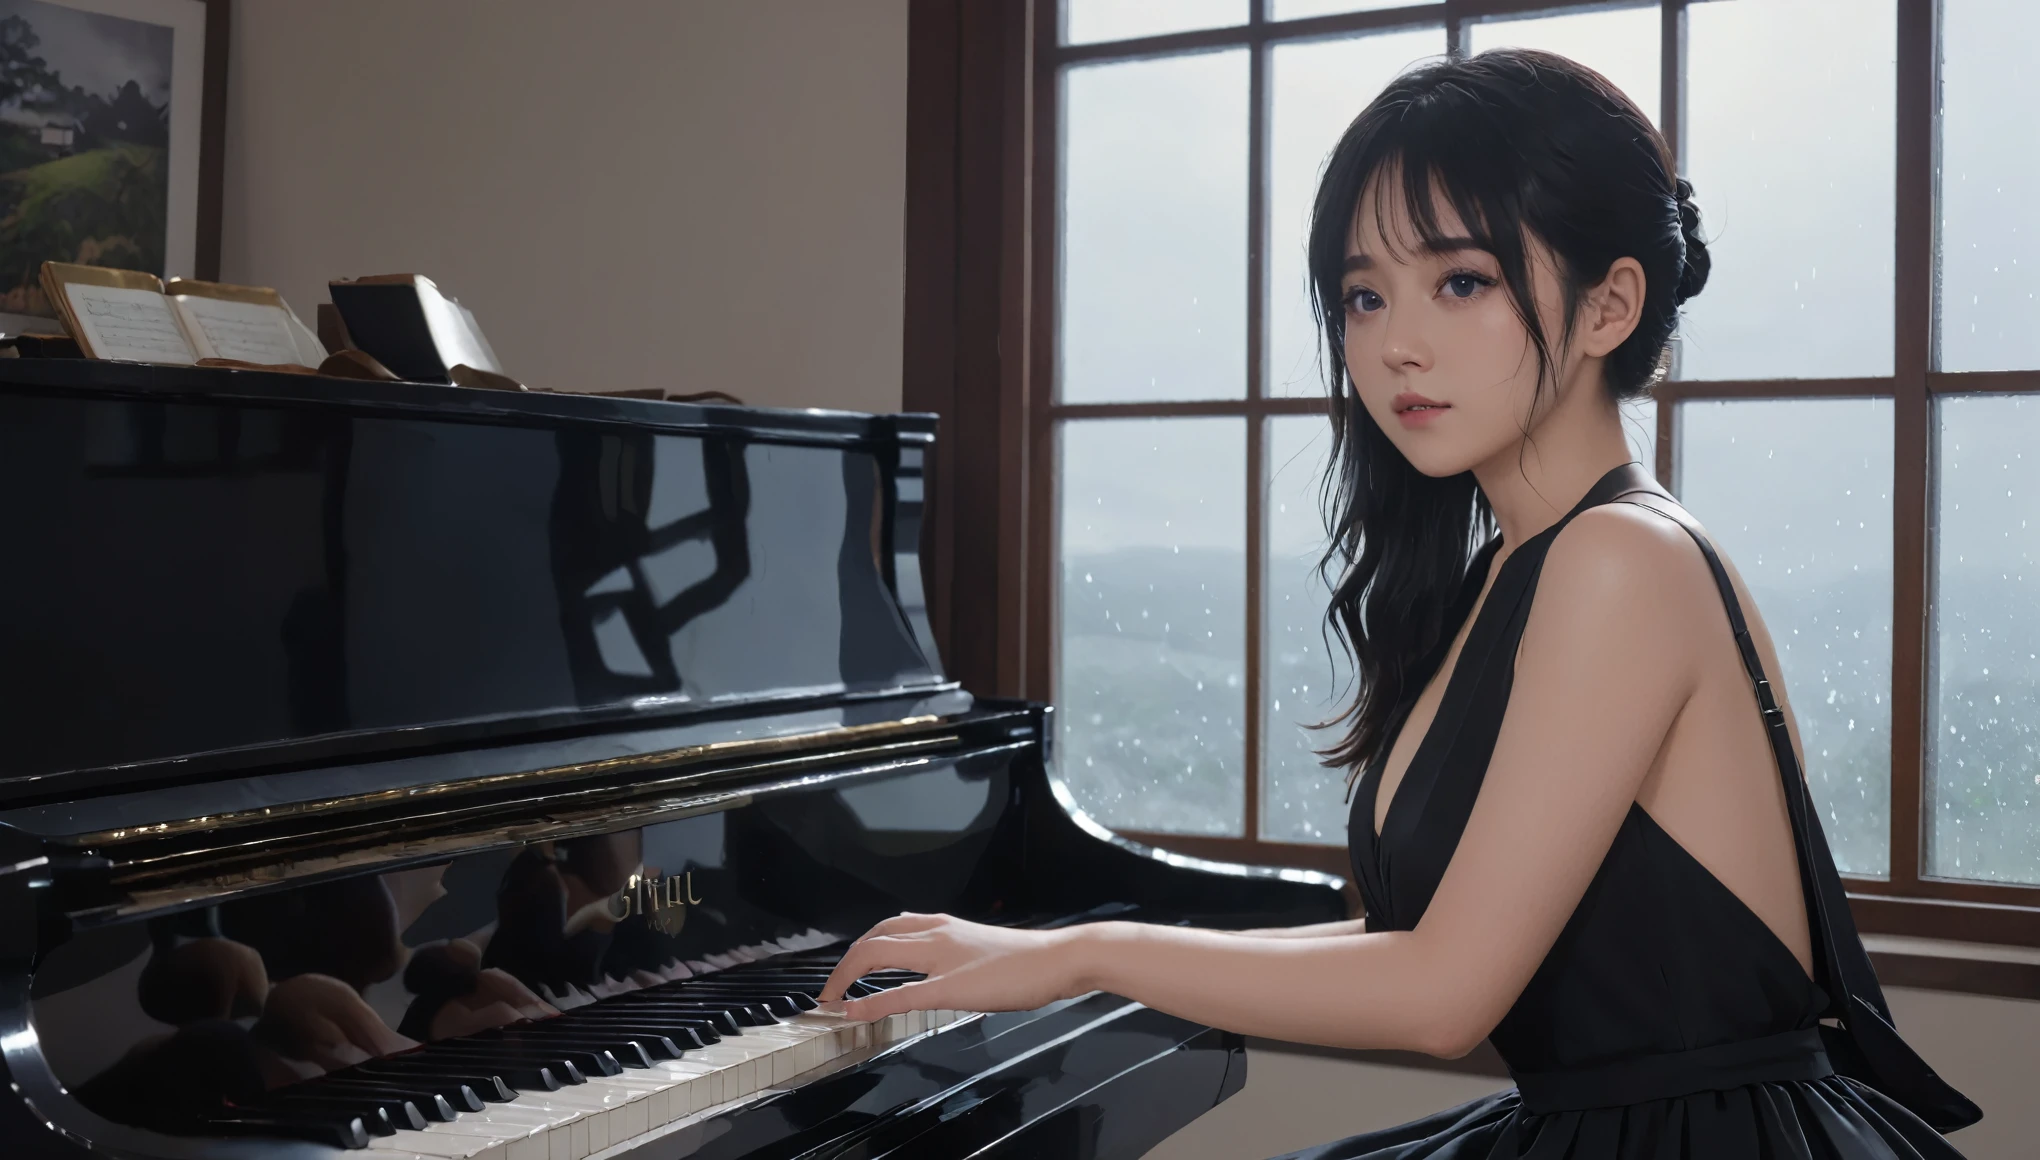 Playing the piano、24-year-old female、I can see the rainy scenery at night from the window、High definition、４K quality、Big Breasts、Wearing an all-black dress、 The whole body is shown alone、Ghibli-style illustrations,Low exposure